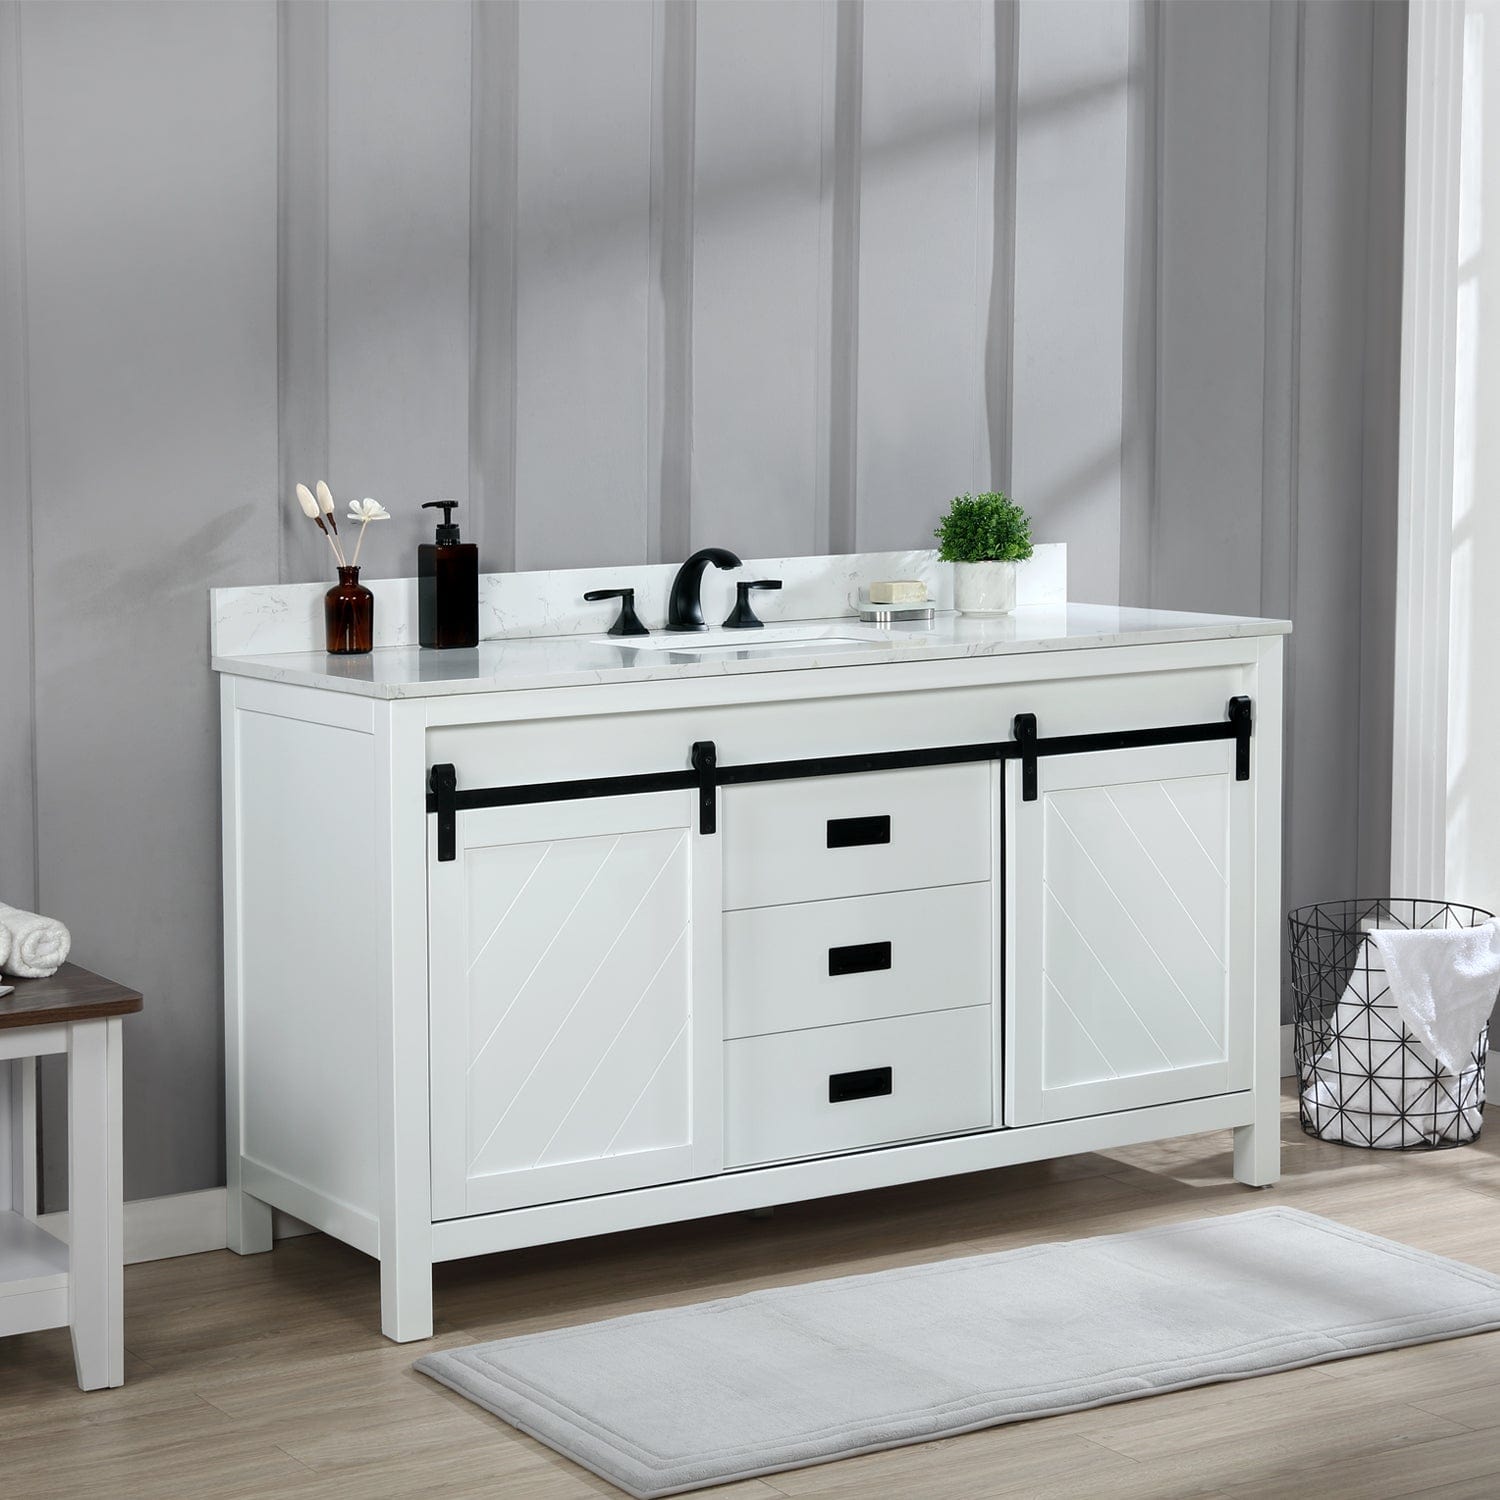 Altair Kinsley 60" Single Bathroom Vanity Set in White and Carrara White Marble Countertop without Mirror 536060S-WH-AW-NM - Molaix696952511284Vanity536060S-WH-AW-NM